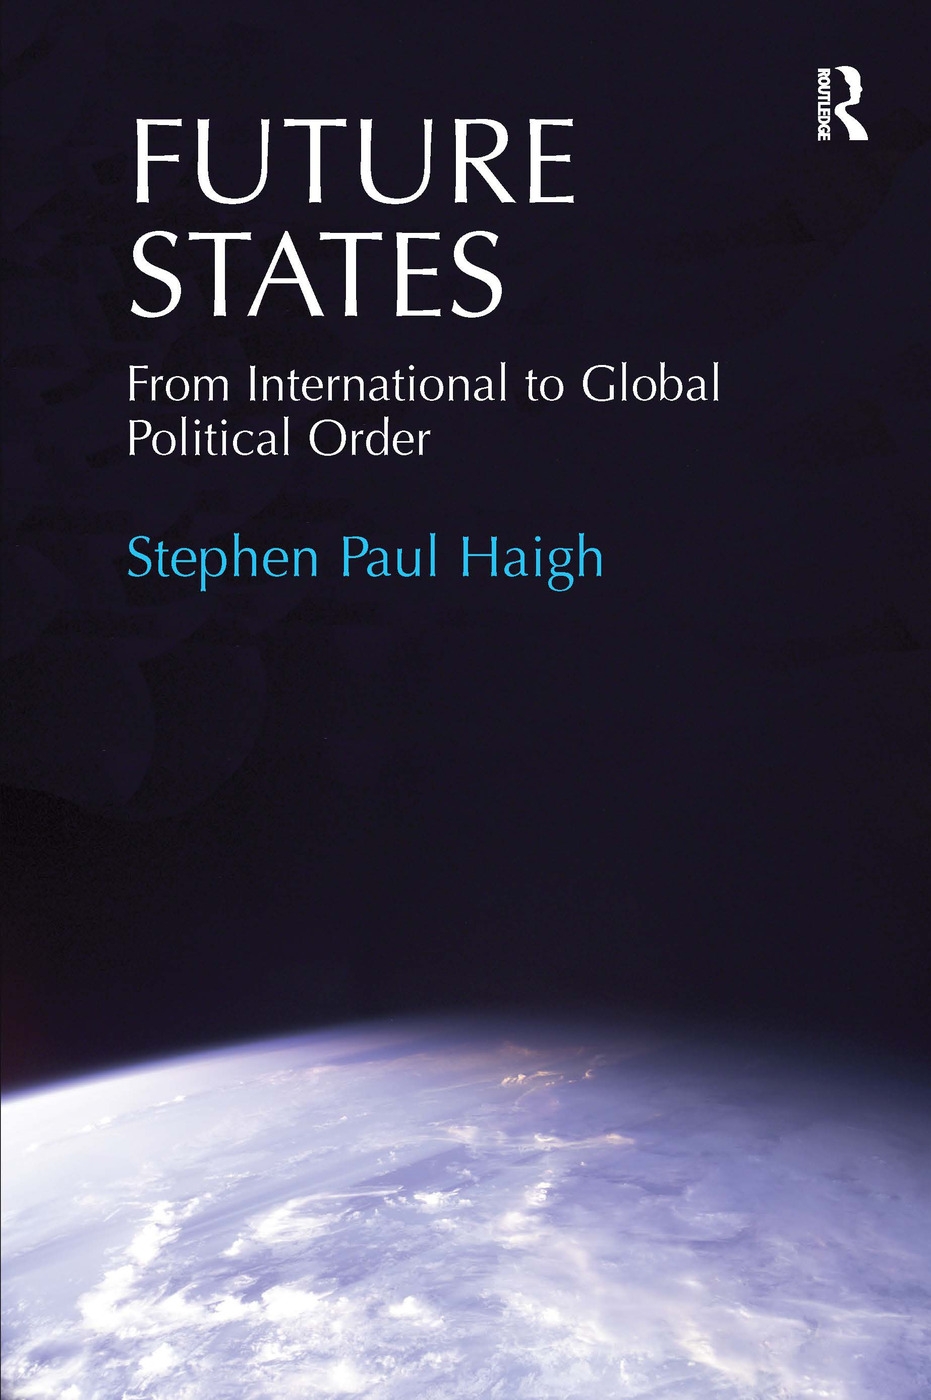 Future States: From International to Global Political Order. Stephen Paul Haigh